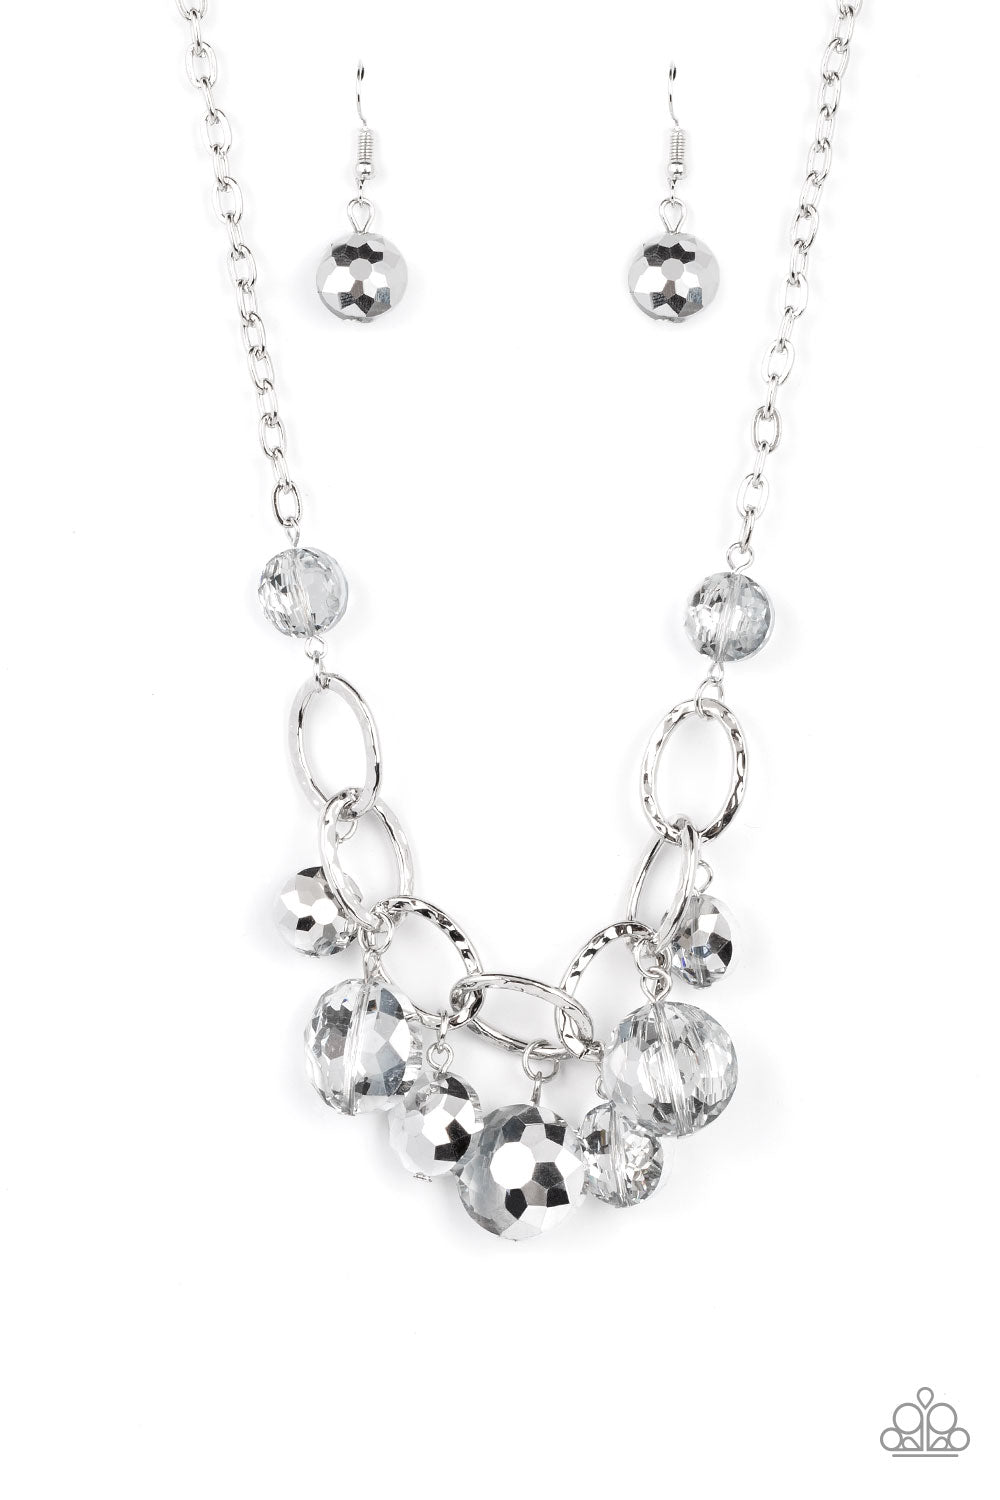 Rhinestone River Silver Necklace - Paparazzi Accessories  A collection of round, glassy silver beads in varying sizes swirl around shiny silver oval links hammered in texture. The beveled shape and faceted surfaces of the beads are brushed in a subtle reflective glaze, creating a dreamy display as they drip below the collar. Features an adjustable clasp closure.  Sold as one individual necklace. Includes one pair of matching earrings.